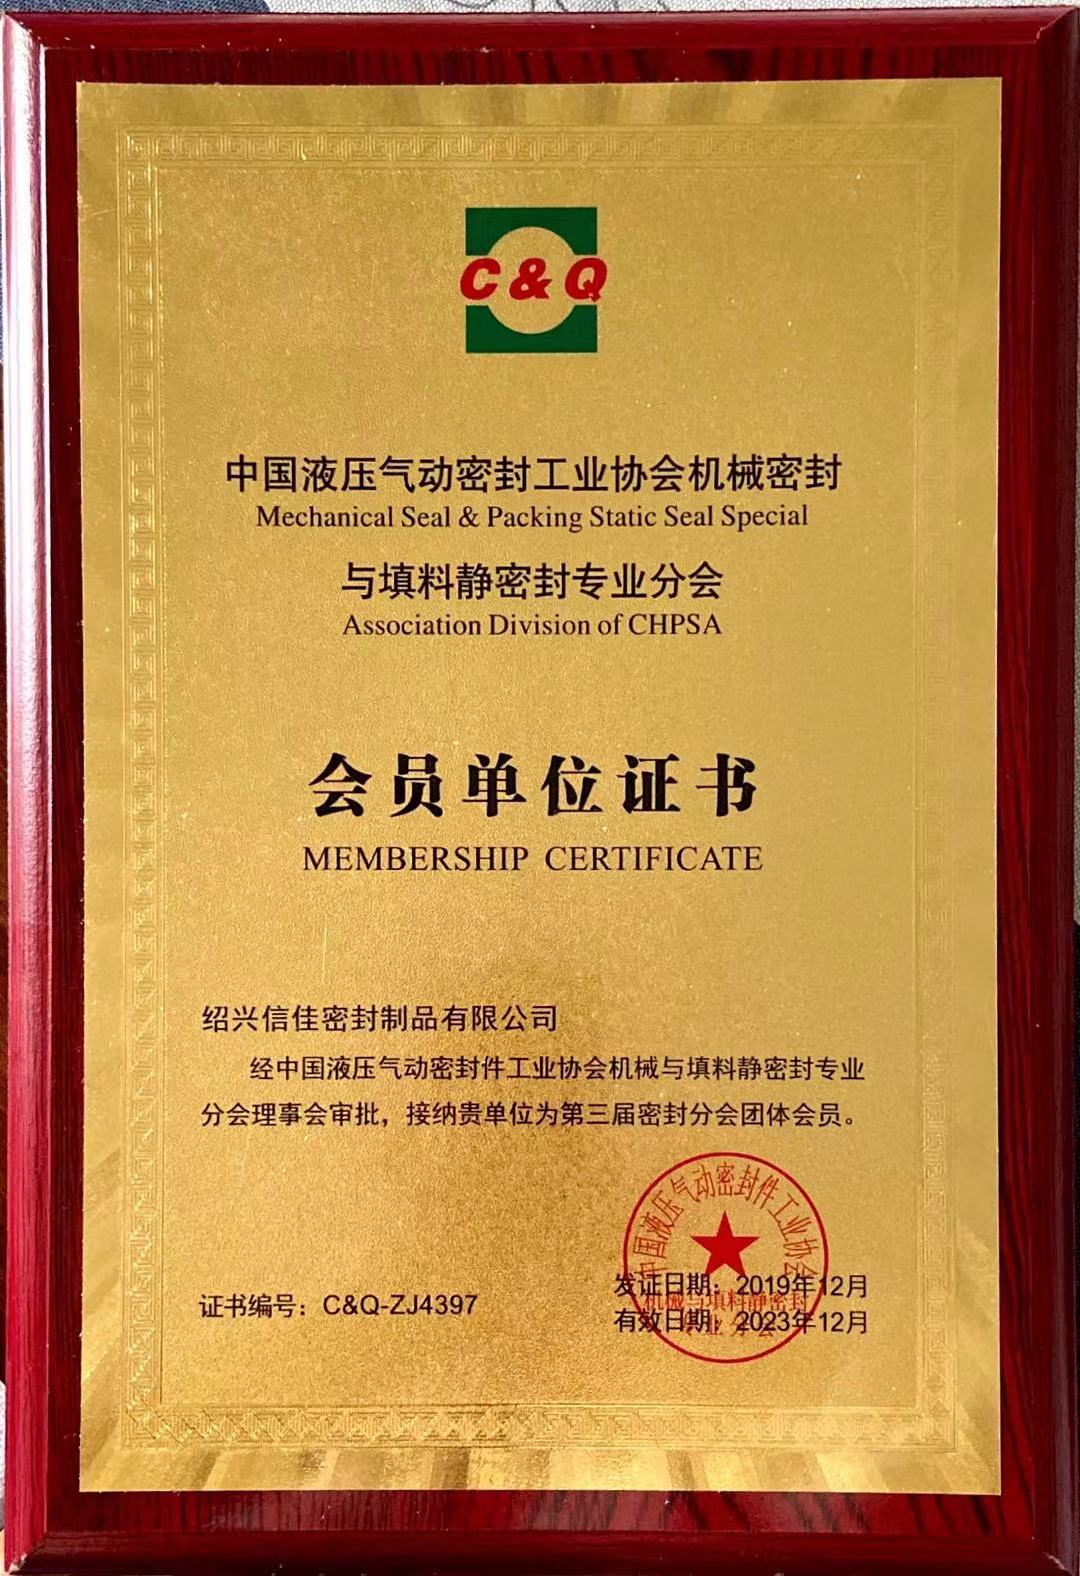 Shaoxing Sealgood gasket and sealing Co., Ltd. became a group member of the 3rd Sealing Branch